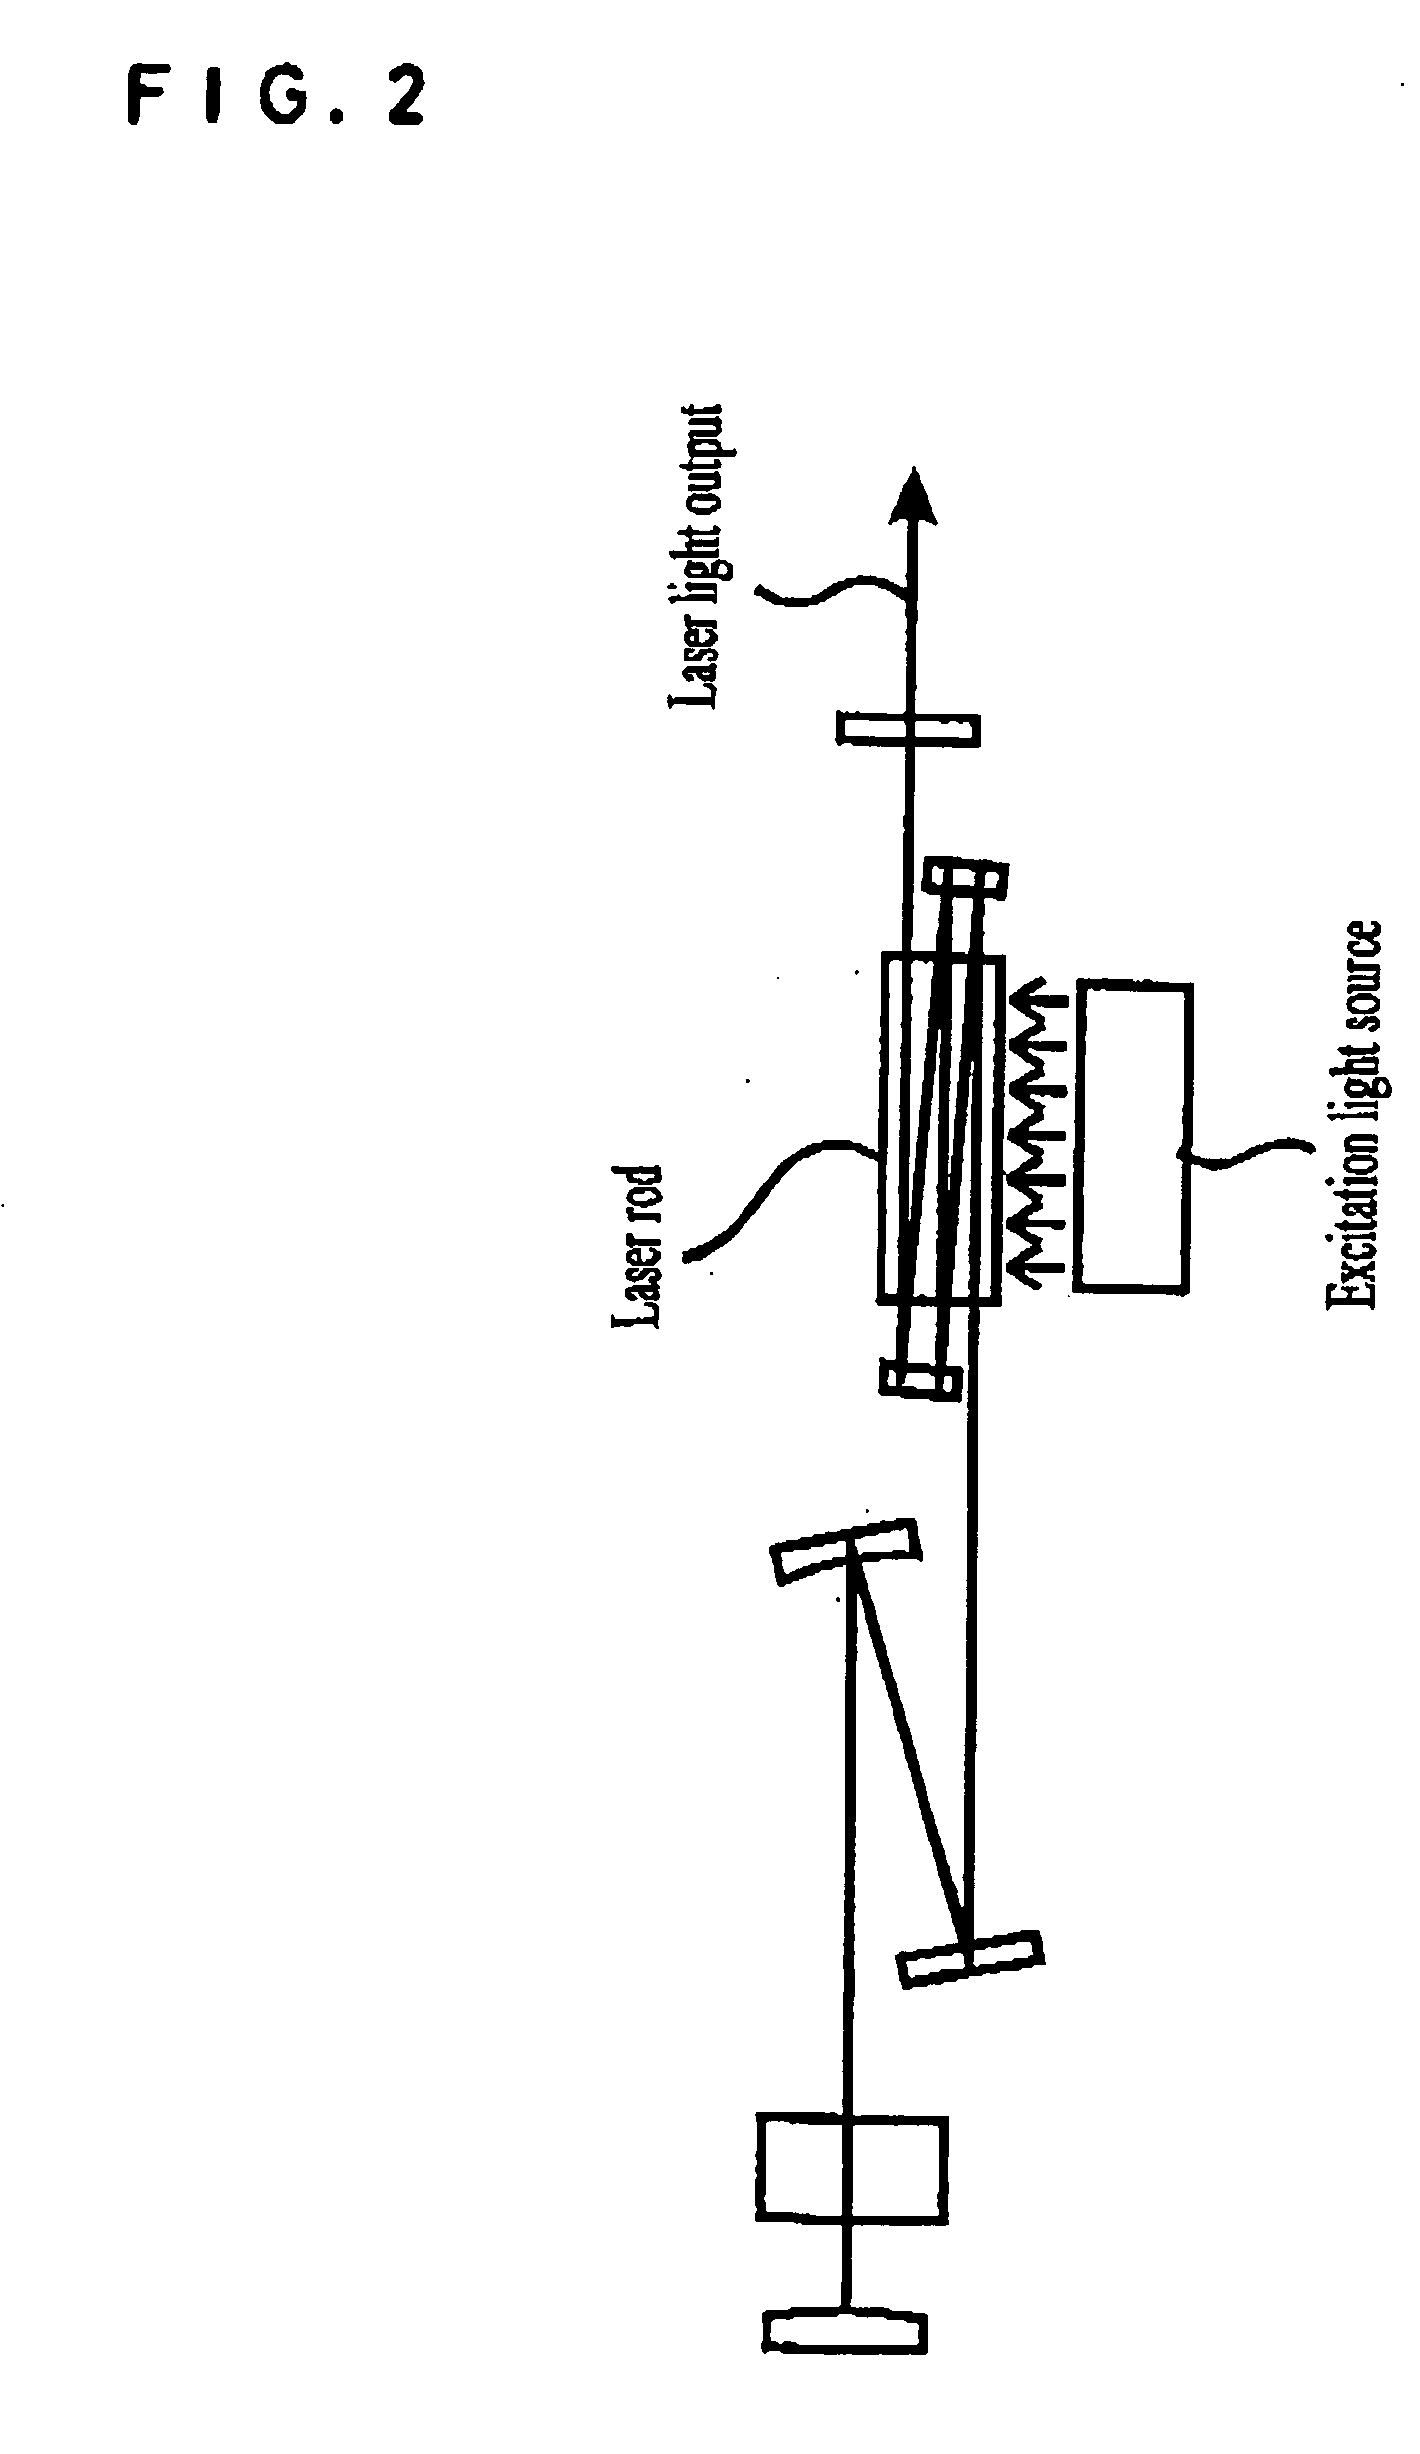 Multipath laser apparatus using a solid-state slab laser rod